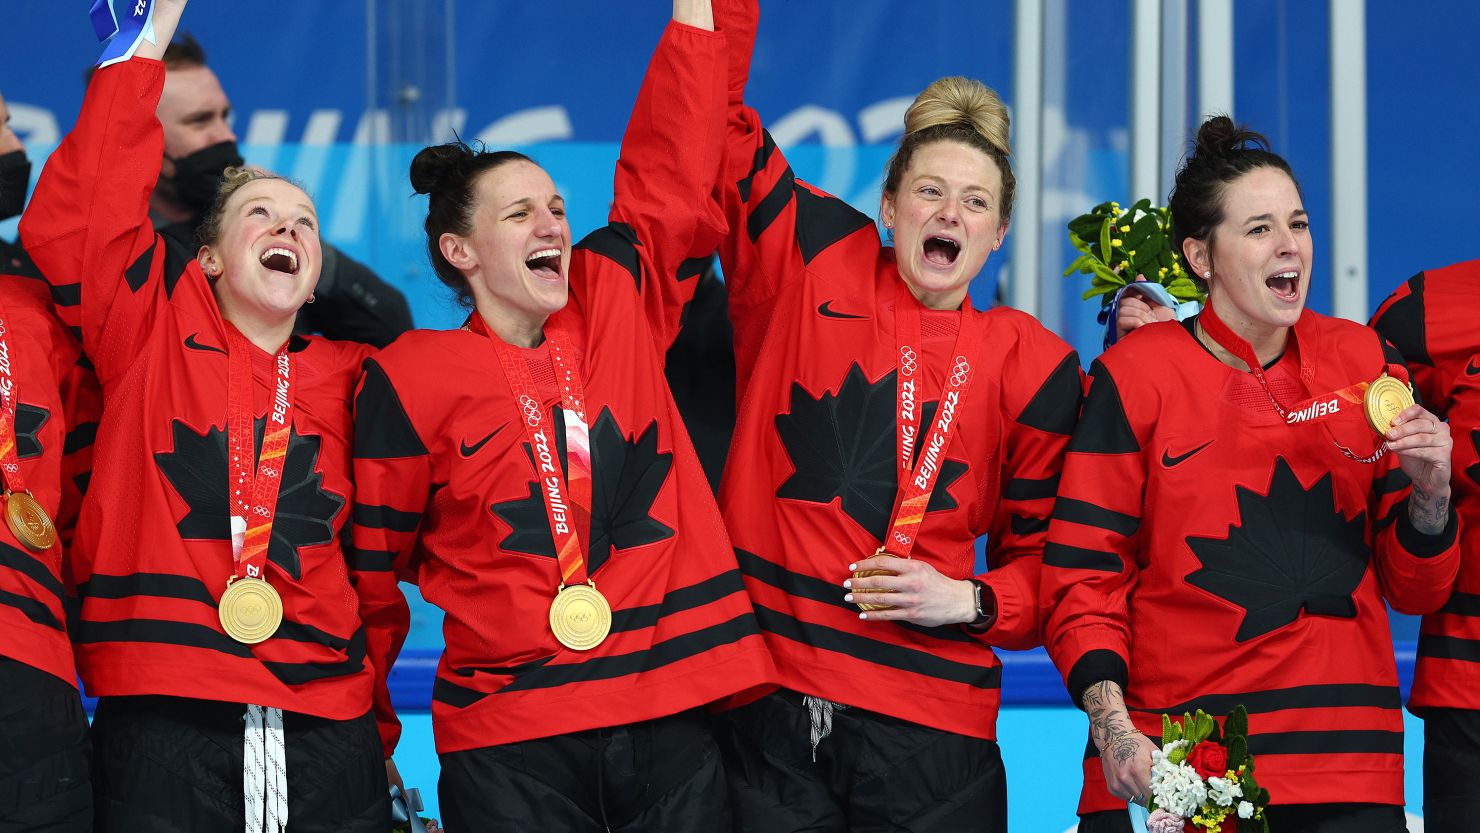 Gold medal winners Sarah Fillier, Jill Saulnier, Renata Fast and Melodie Daoust of Team Canada celebrate during the medal ceremony after the women's ice hockey final between Canada and the United States.